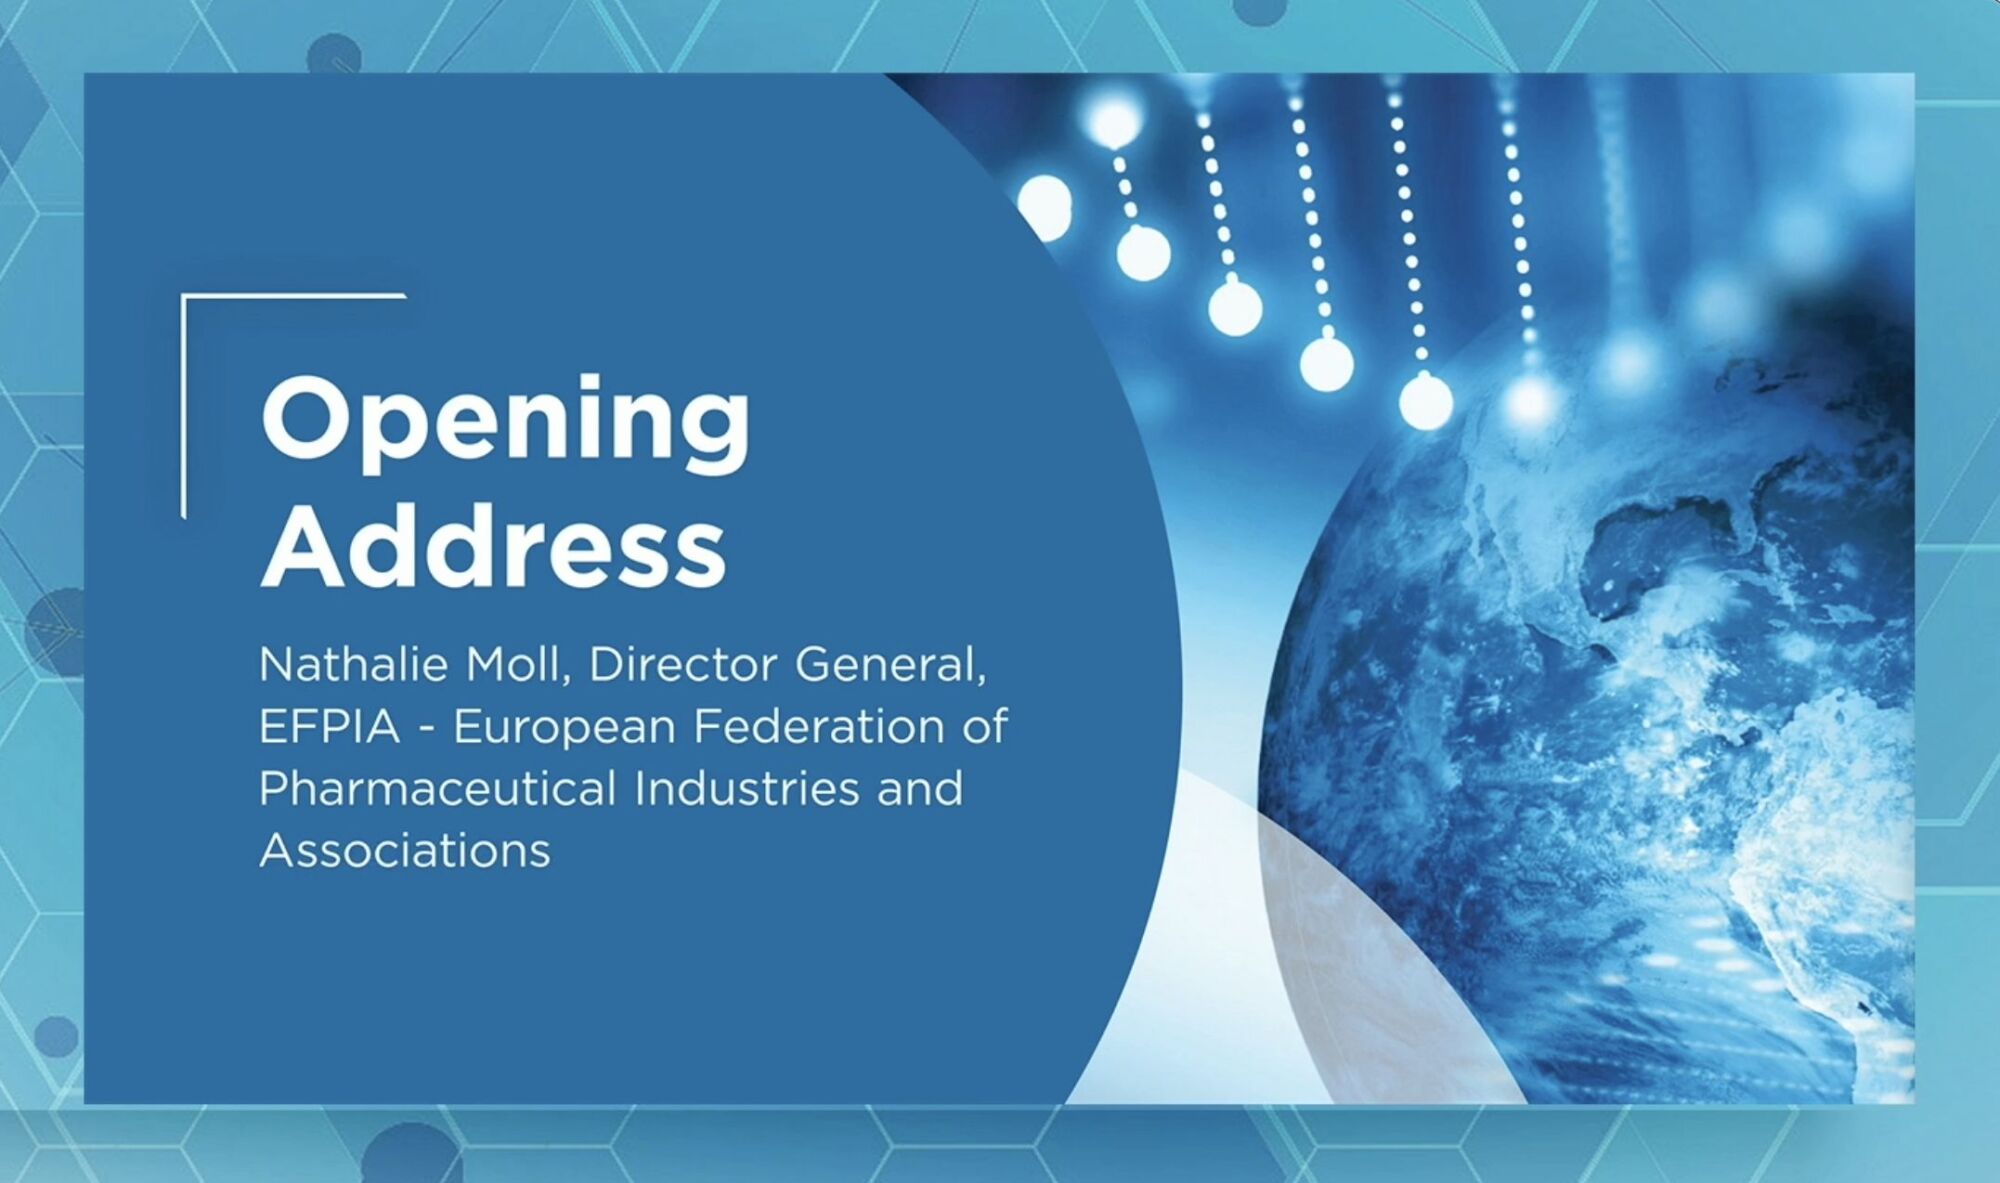 Opening Address slide featuring Nathalie Moll, Director General, EFPIA - European Federation of Pharmaceutical Industries and Associations, with a globe and abstract light design background.